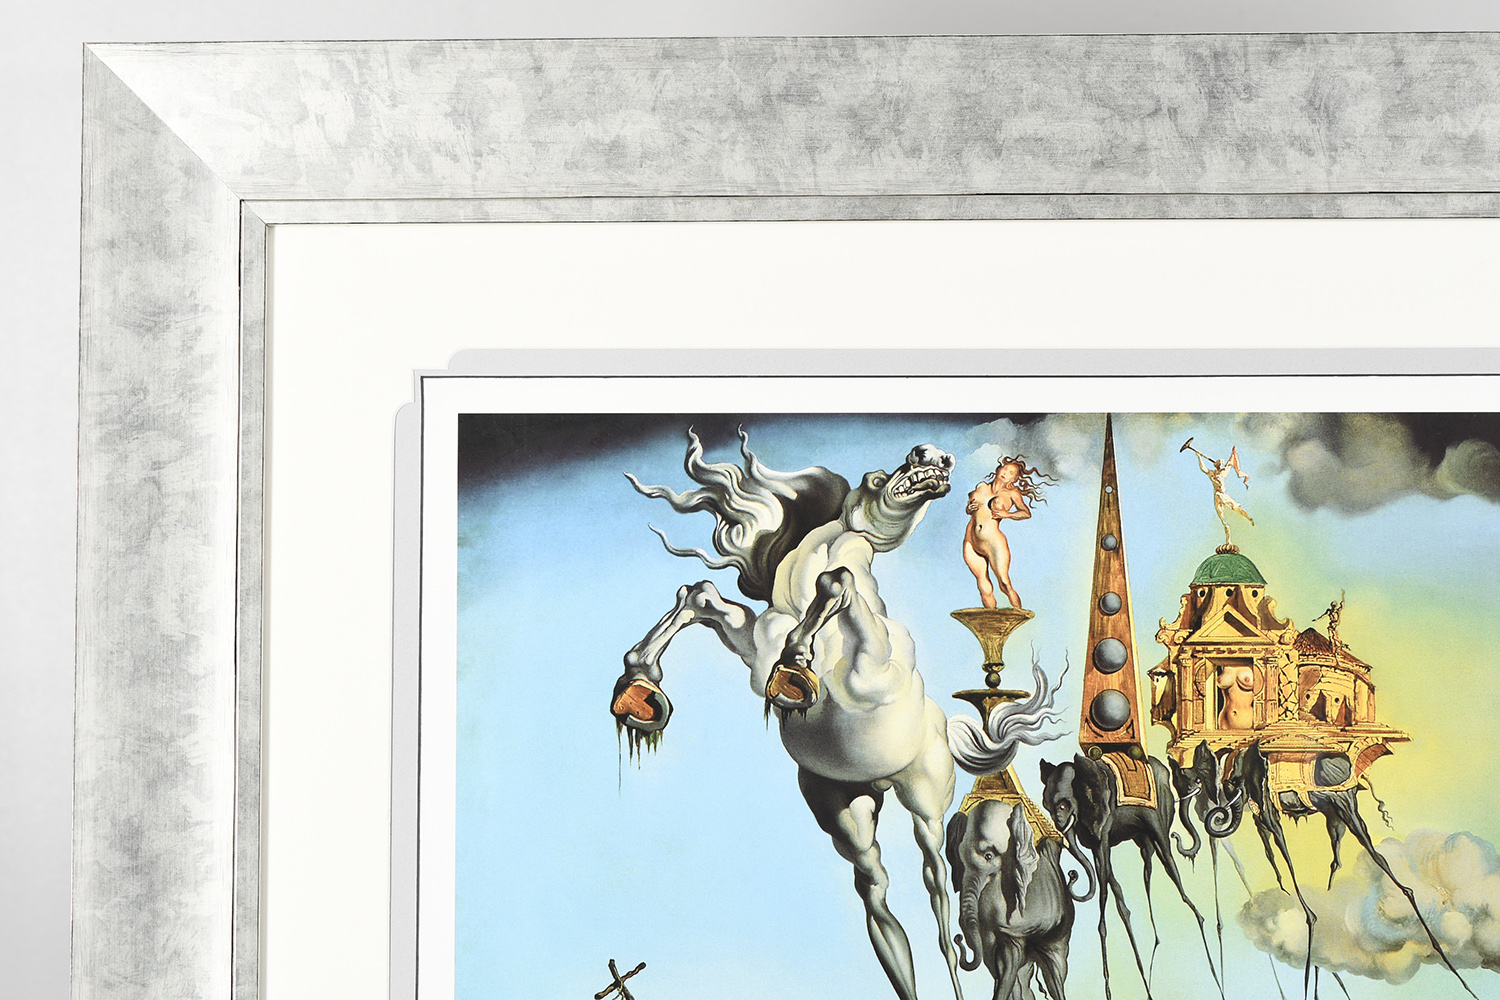 Salvador Dali Limited Edition. 1 of only 75 Published. - Image 7 of 9